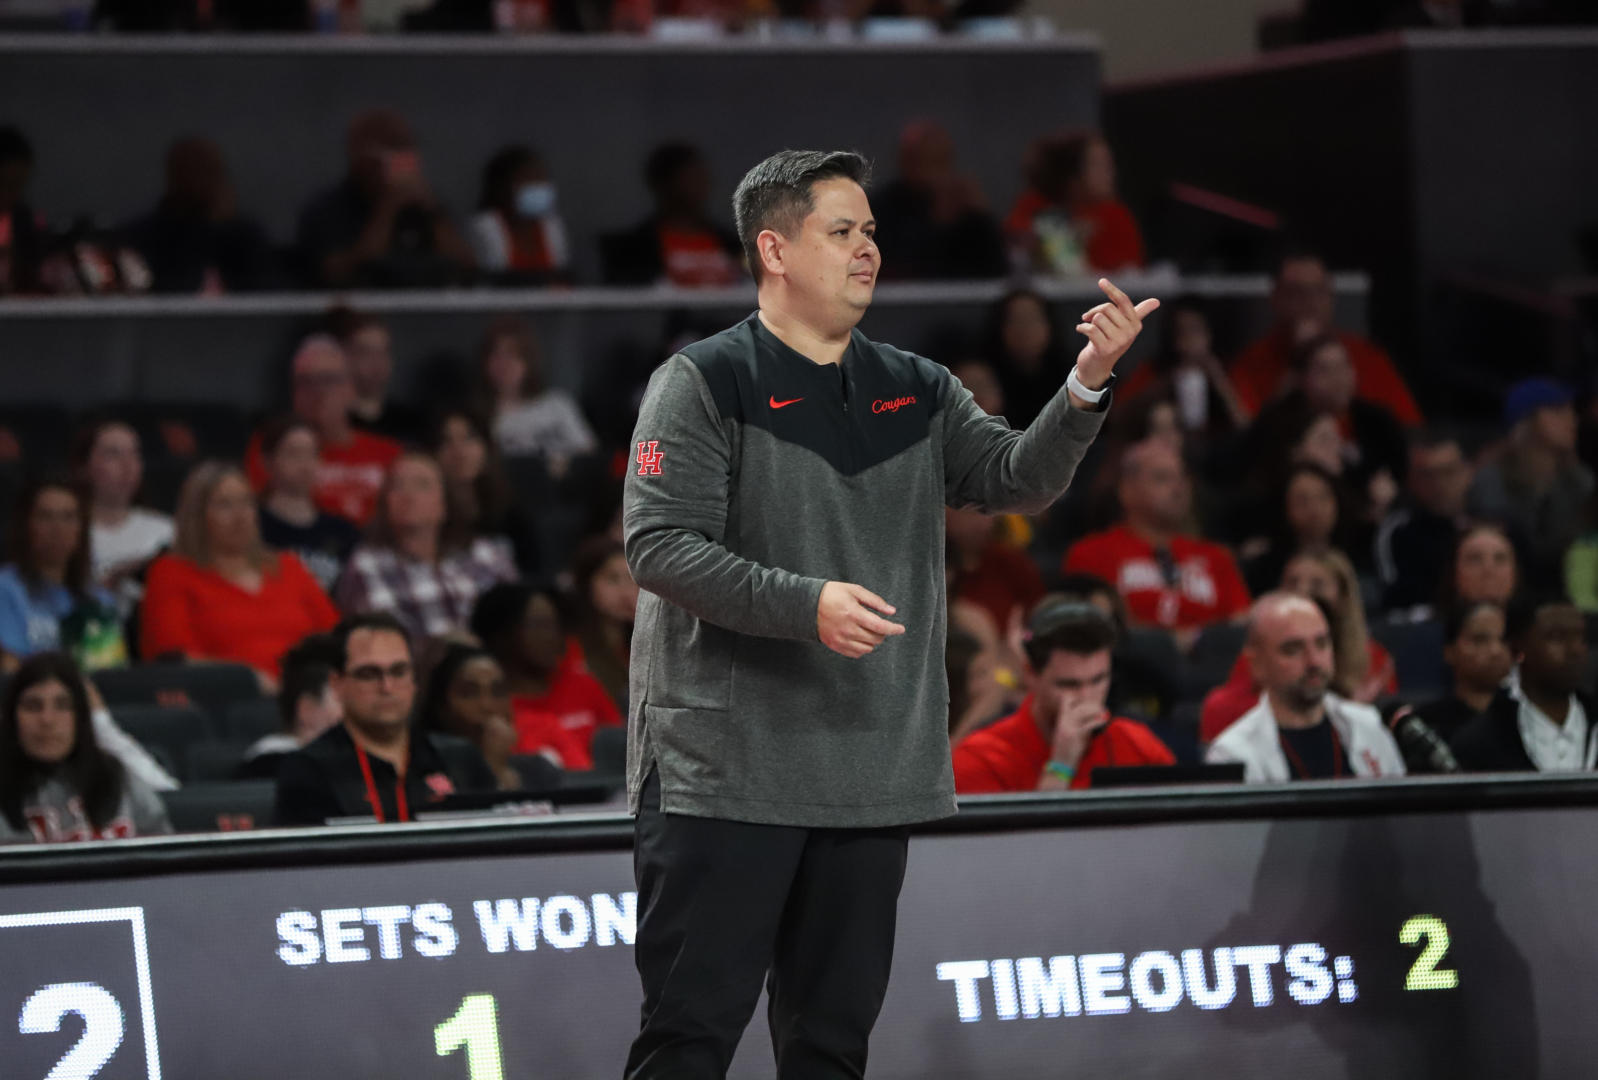 UH volleyball head coach David Rehr will remain with the program through at least 2026 after signing a four-year contract extension. | Sean Thomas/The Cougar